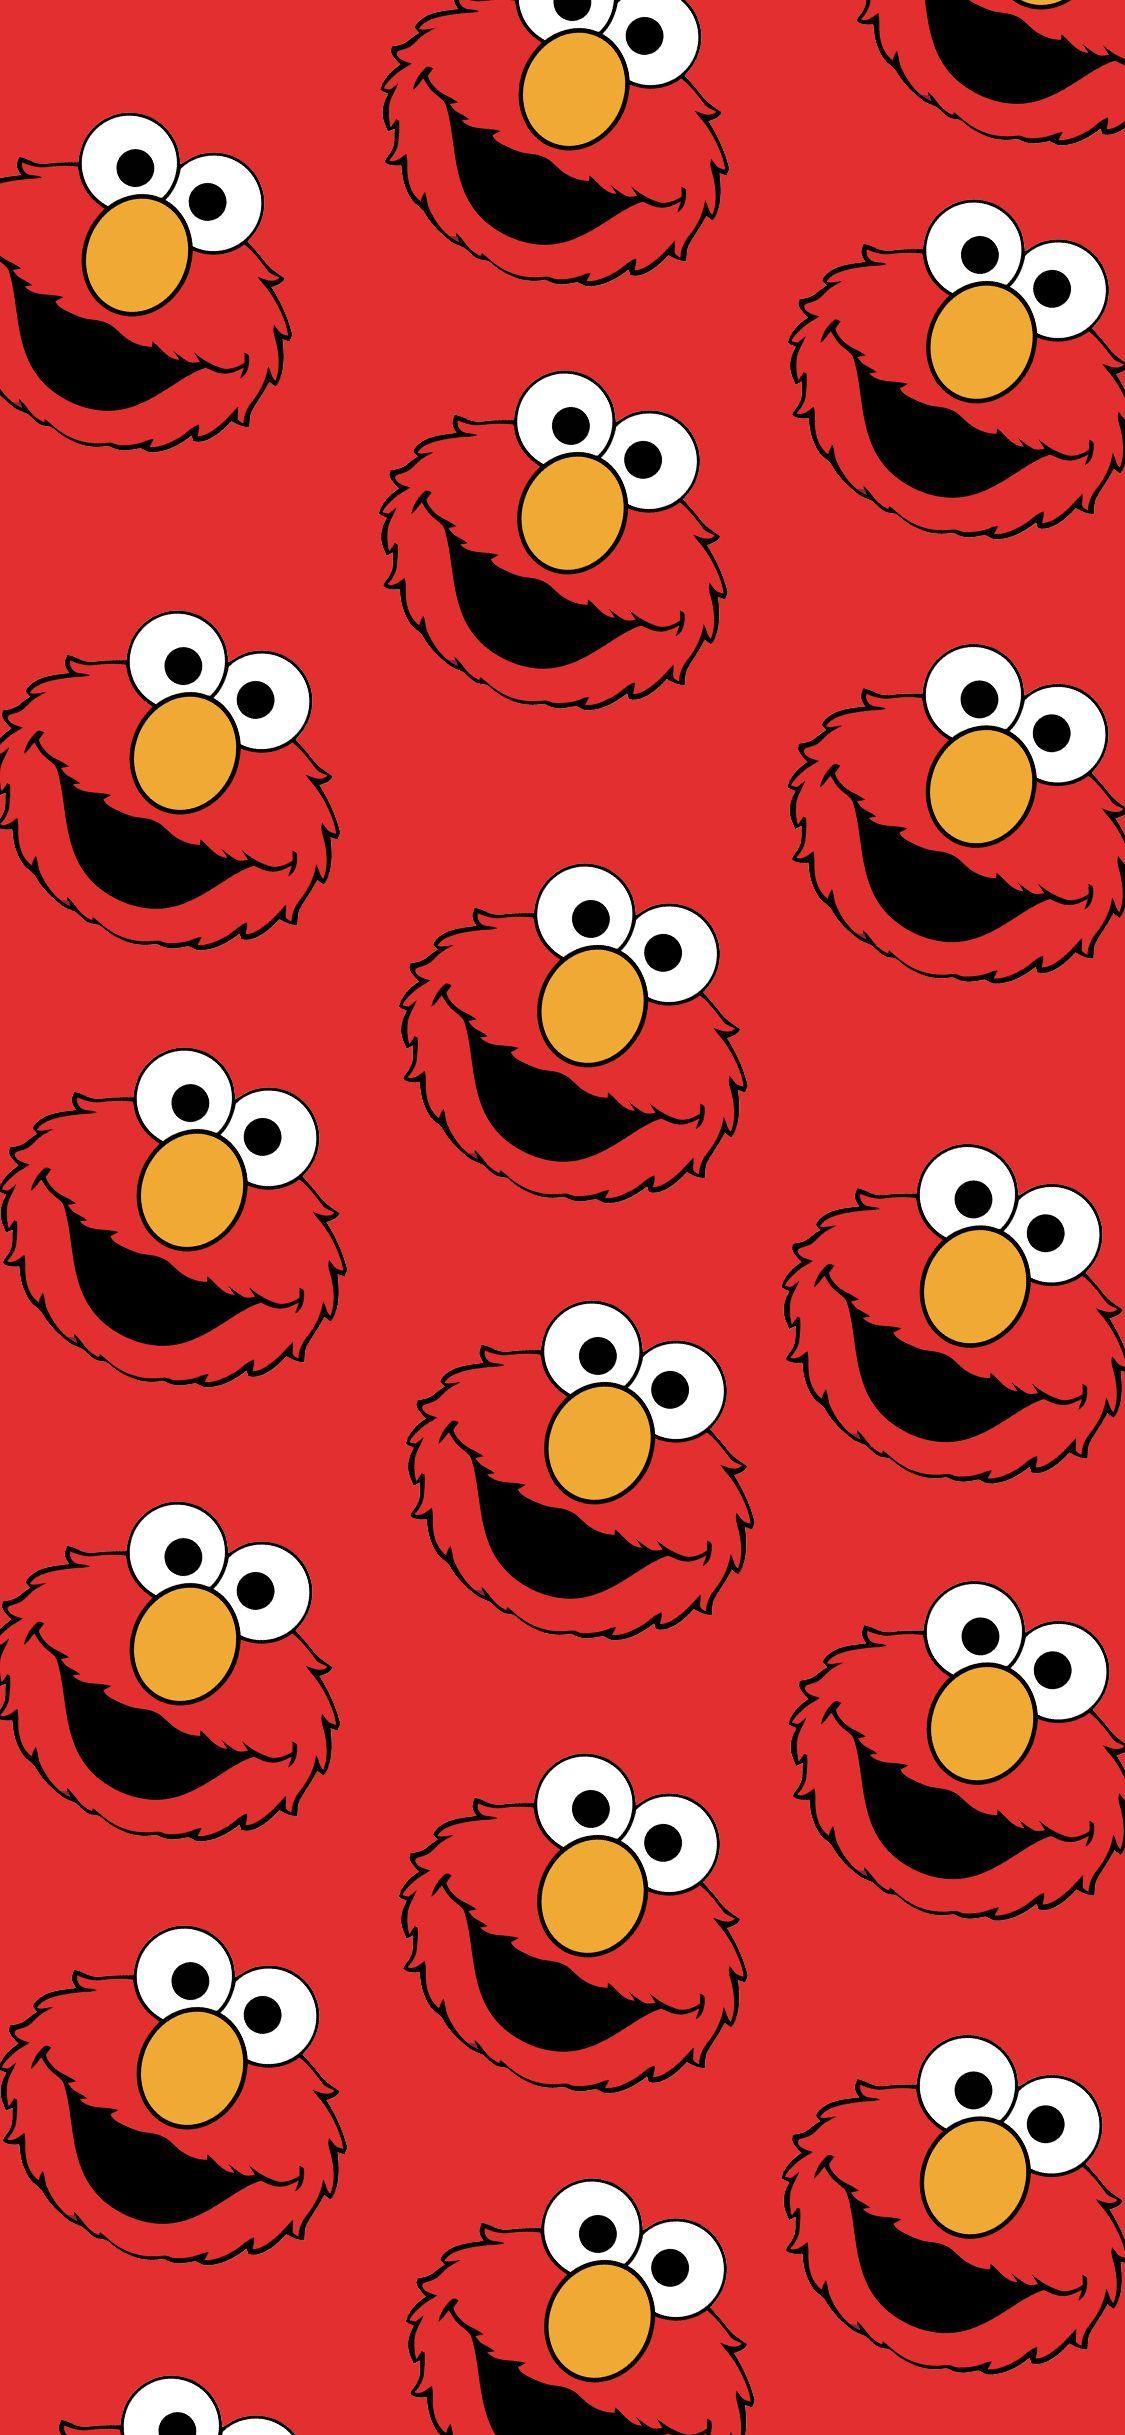 Background Elmo Wallpaper Discover more Character Cute Elmo